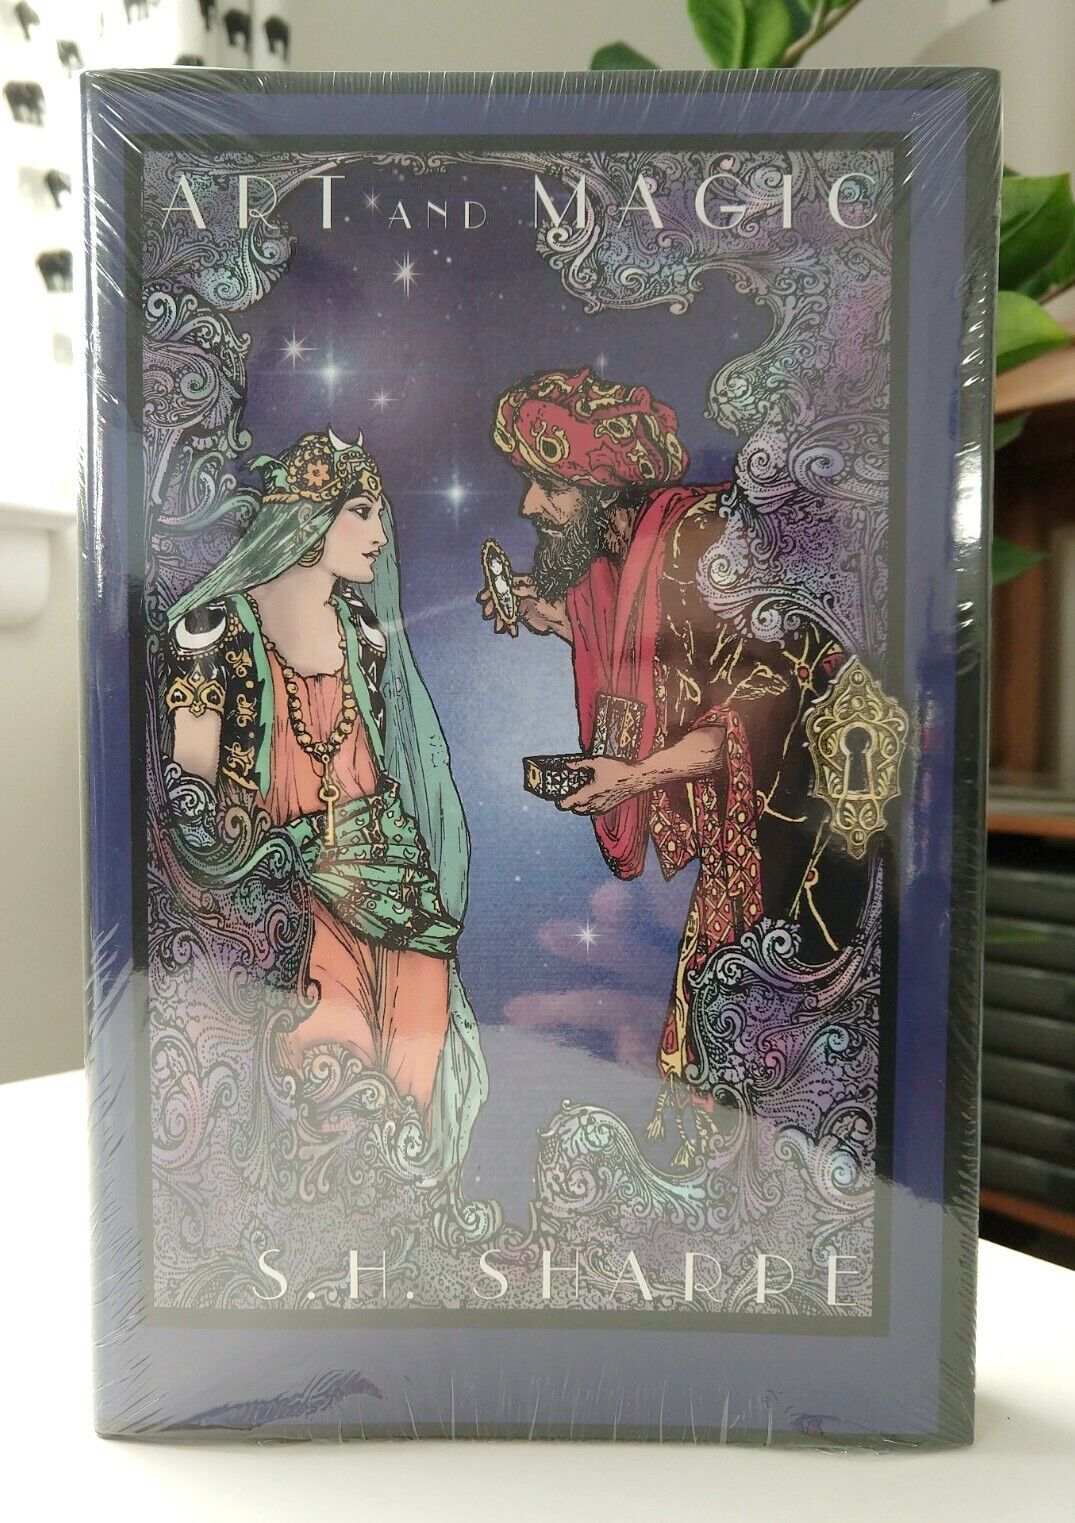 Art and Magic Book by S.H Sharpe The Miracle Factory NEW SEALED